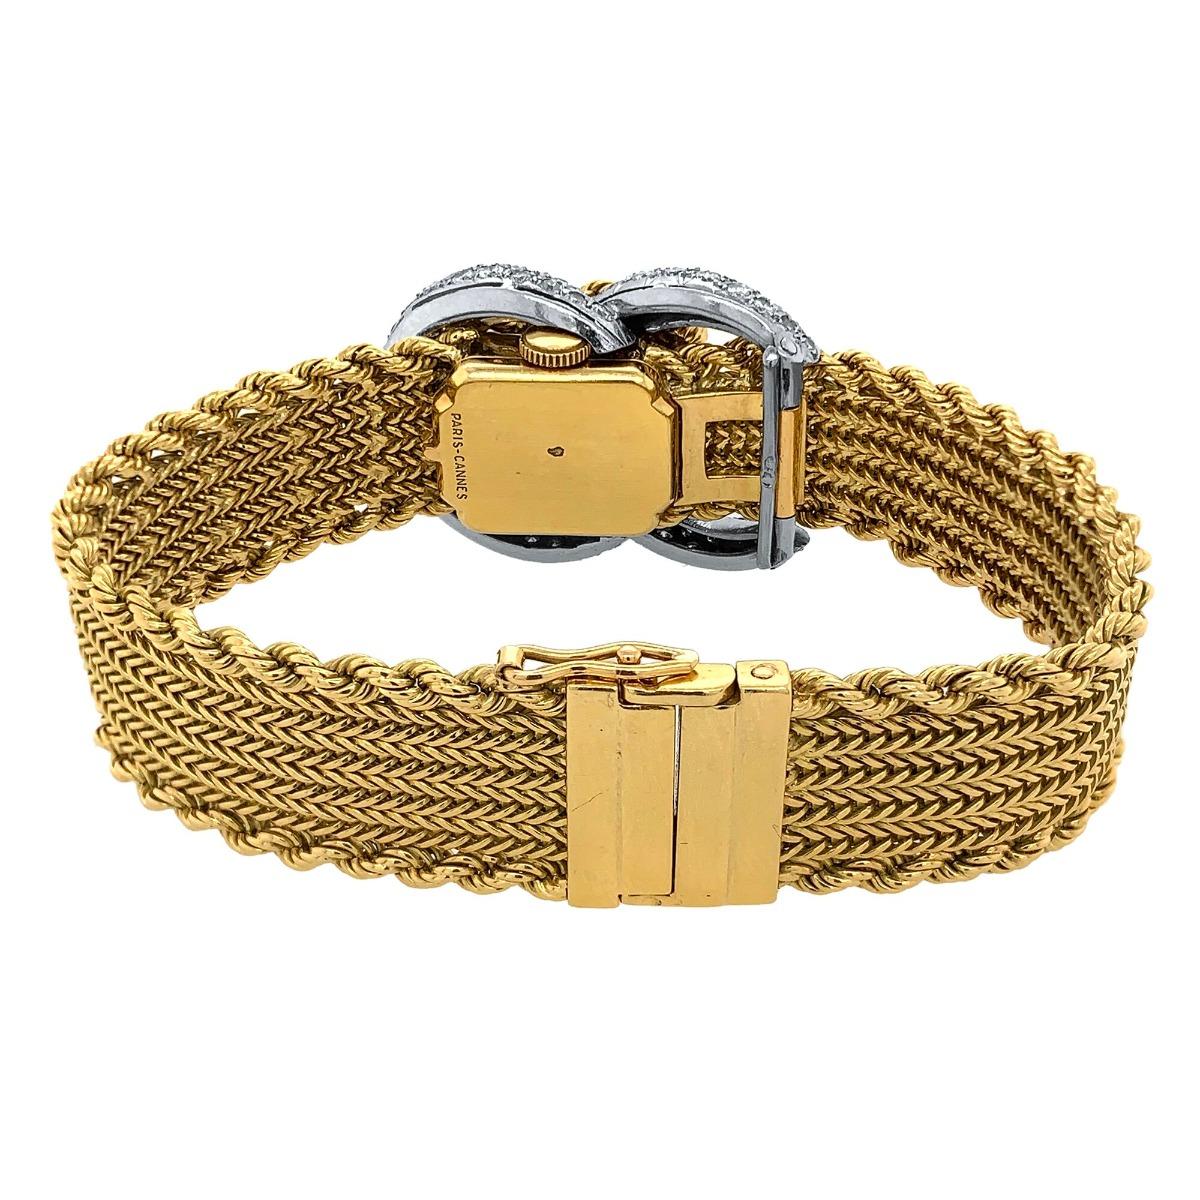 By: J Lacloche
Metal: 18k Yellow Gold
Condition: Excellent
Origin: France
Year Of Manufacture: Circa 1940s
Fits a wrist size of 2 inches
Length: 6.7 inches
Gemstone: Diamond
Diamond weight: 2.5 CT
Color: D-E
Clarity: VS
Total Item Weight: 61.2